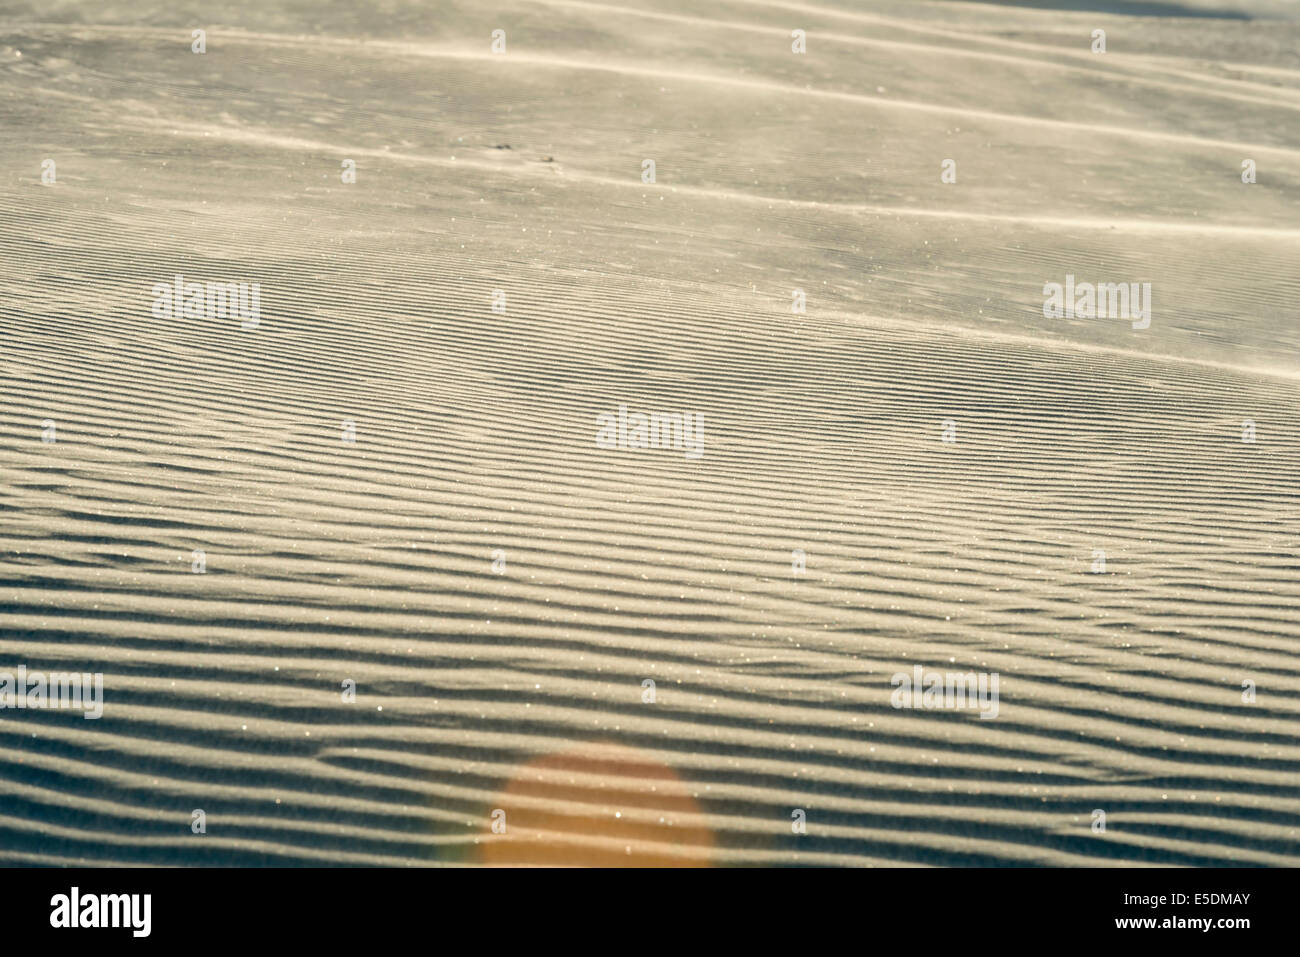 New Zealand, Golden Bay, Wharariki Beach, wind patterns and reflections in a sand dune Stock Photo